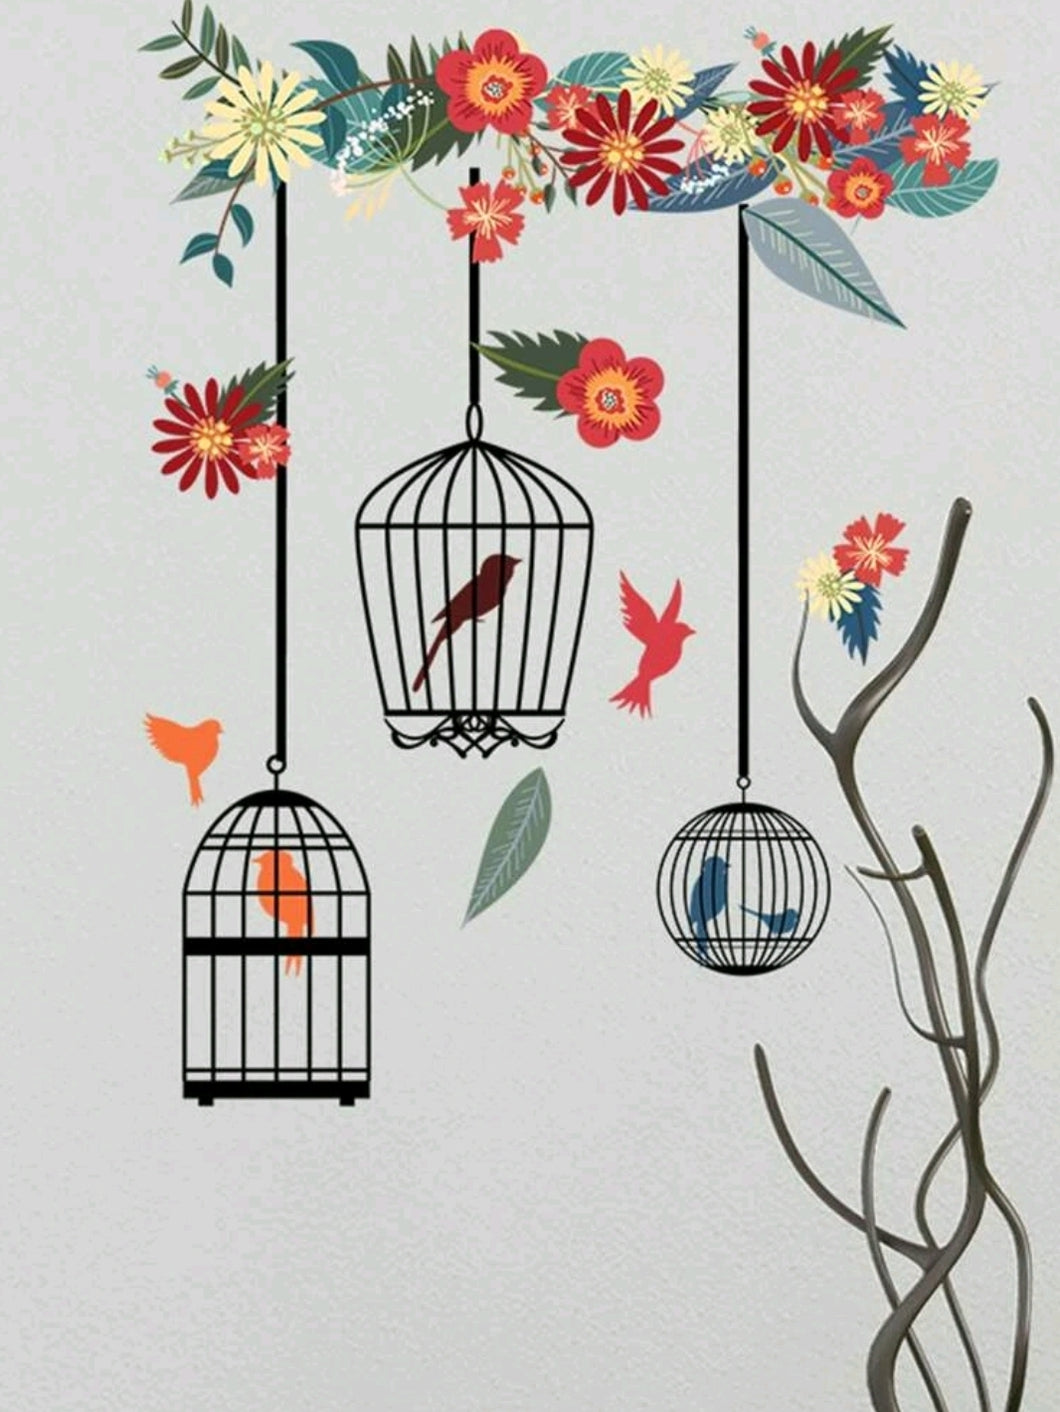  'Beautify any wall with these beautiful floral stickers in spring theme. With a colourful bird cages design, these stickers will make any environment more very trendy and joyful'.      Type: Wall Stickers     Room: Living Room, Bedroom     Colour: Multicolour     Pattern Type: Floral     Composition: 100% PVC     Material: PVC     Size: Length 58 cm (22.8 inch) X Width 32 cm (12.6 inch)